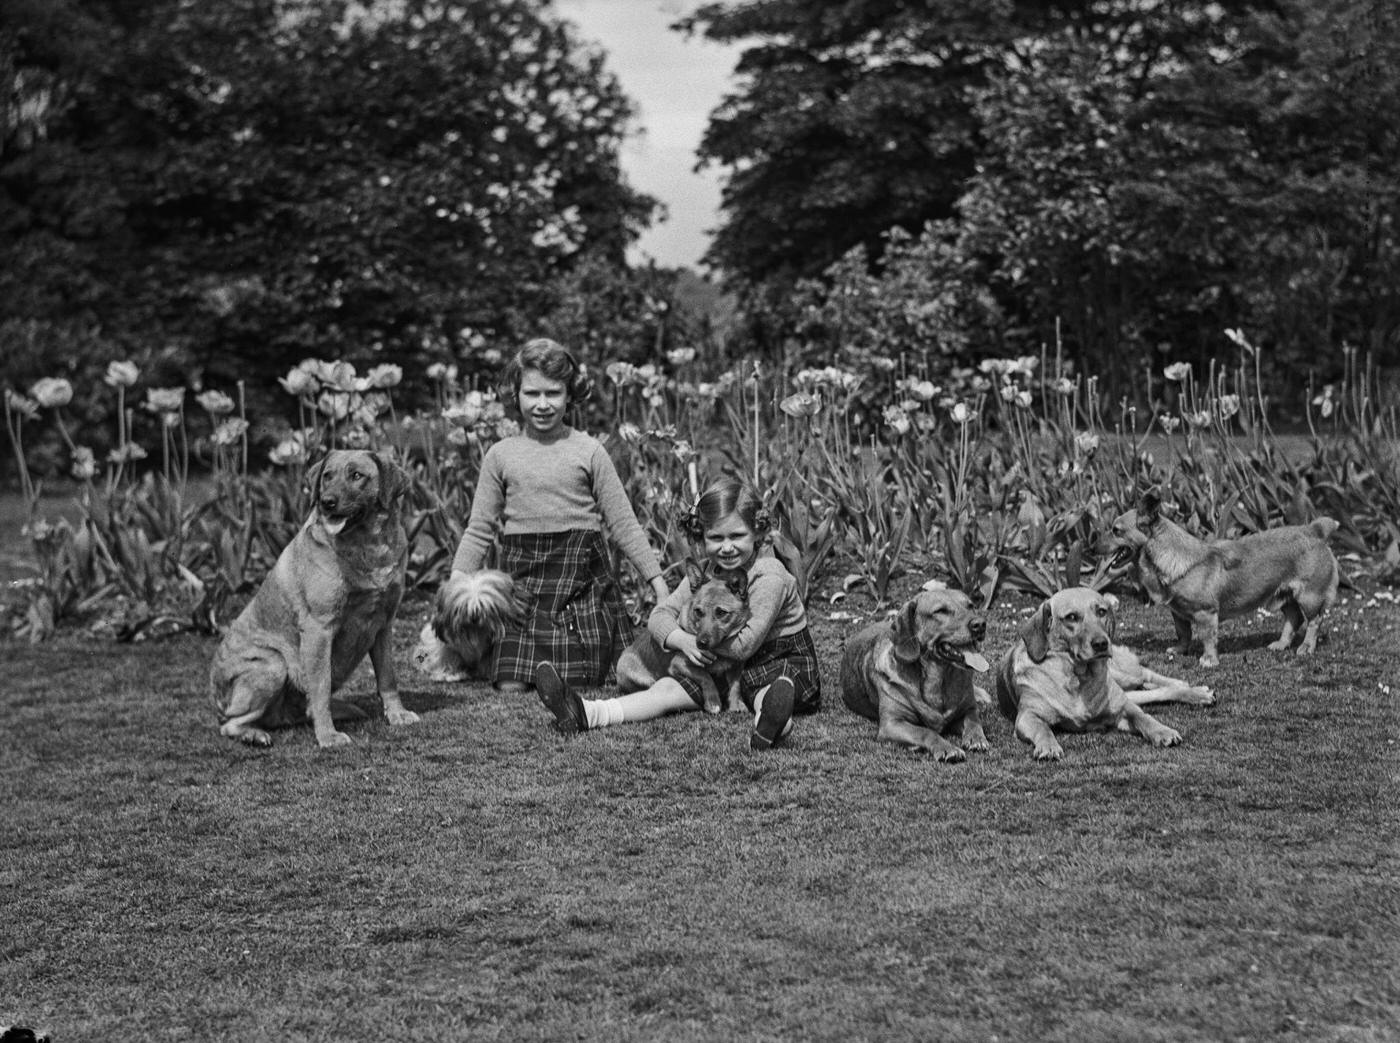 The Royal Princesses Margaret and Elizabeth with their dogs, including Pembroke Welsh Corgi dogs Dookie and Jane and Tibetan Lion Choo-Choo, at the Royal Lodge